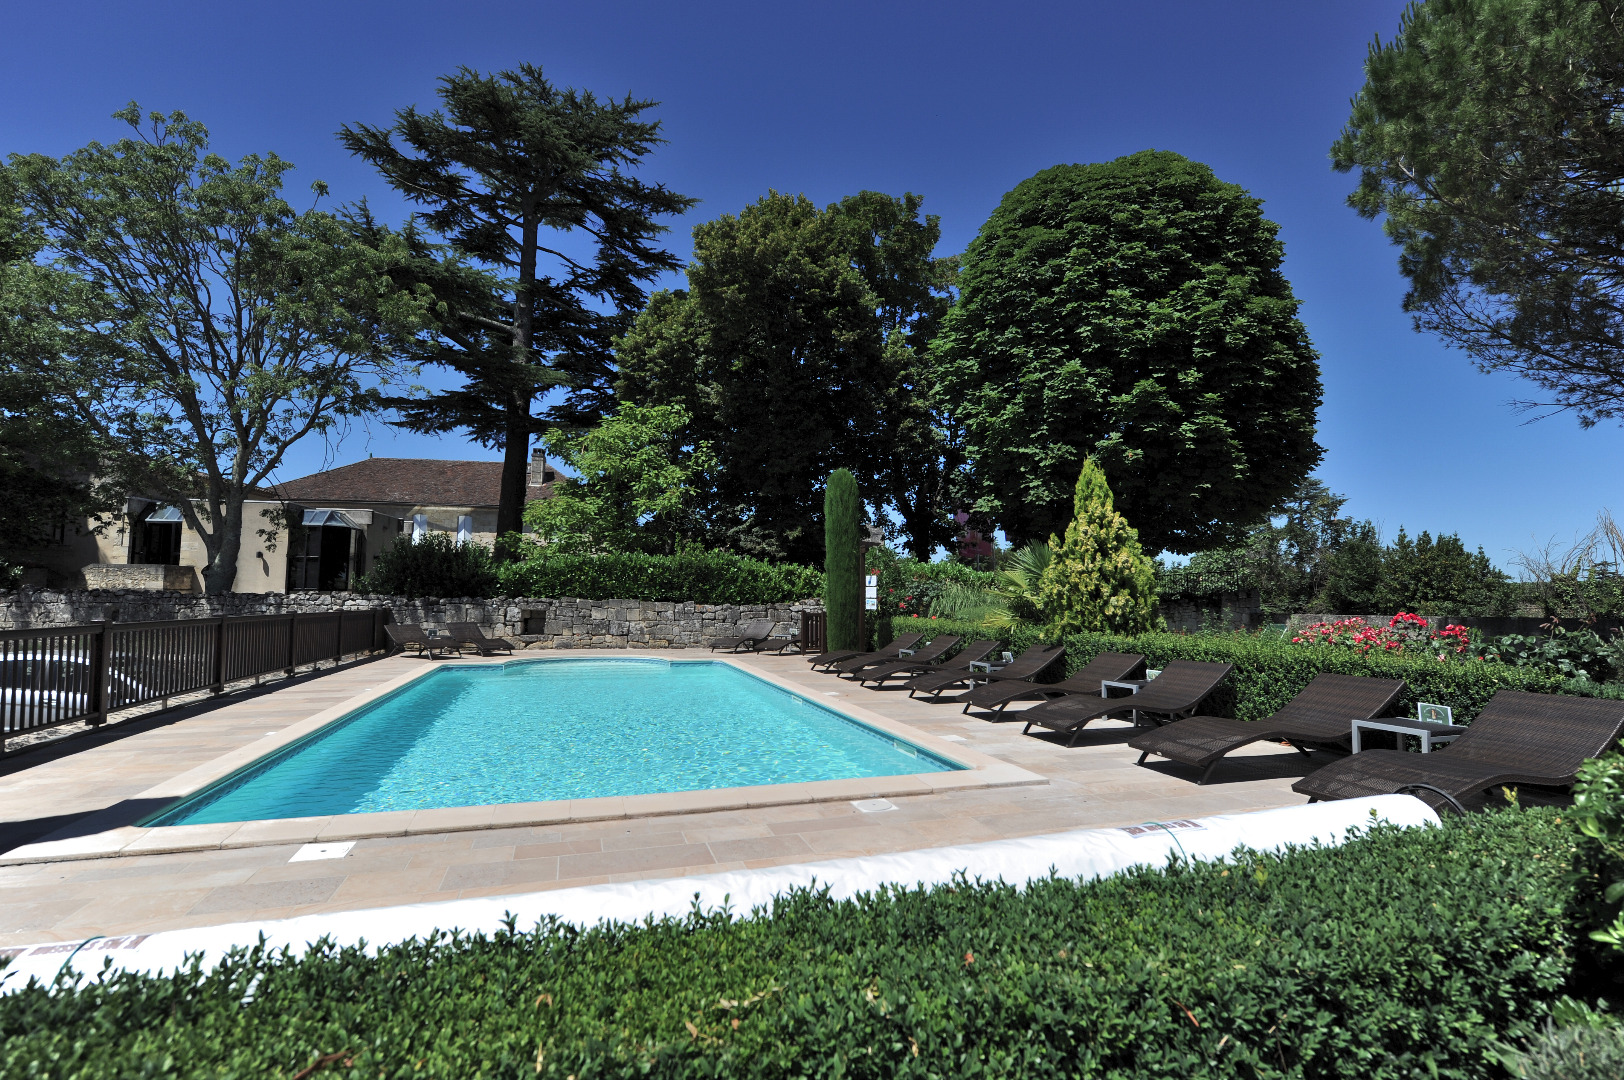 Gardens and inviting pool at Au Logis des Remparts. Photos courtesy of Au Logis des Remparts.